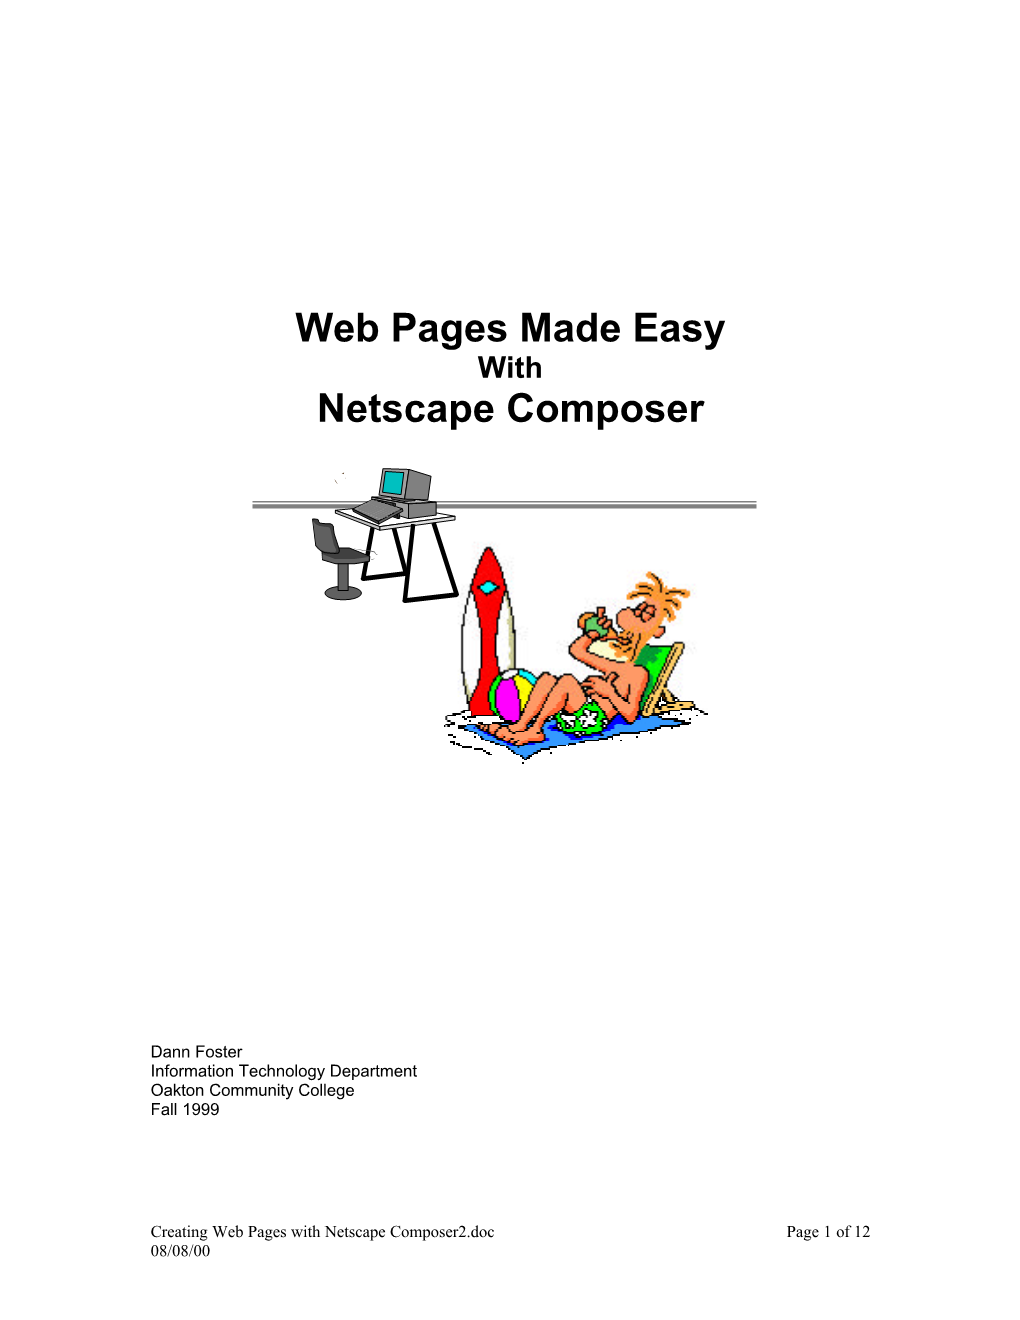 Web Pages Made Easy Netscape Composer